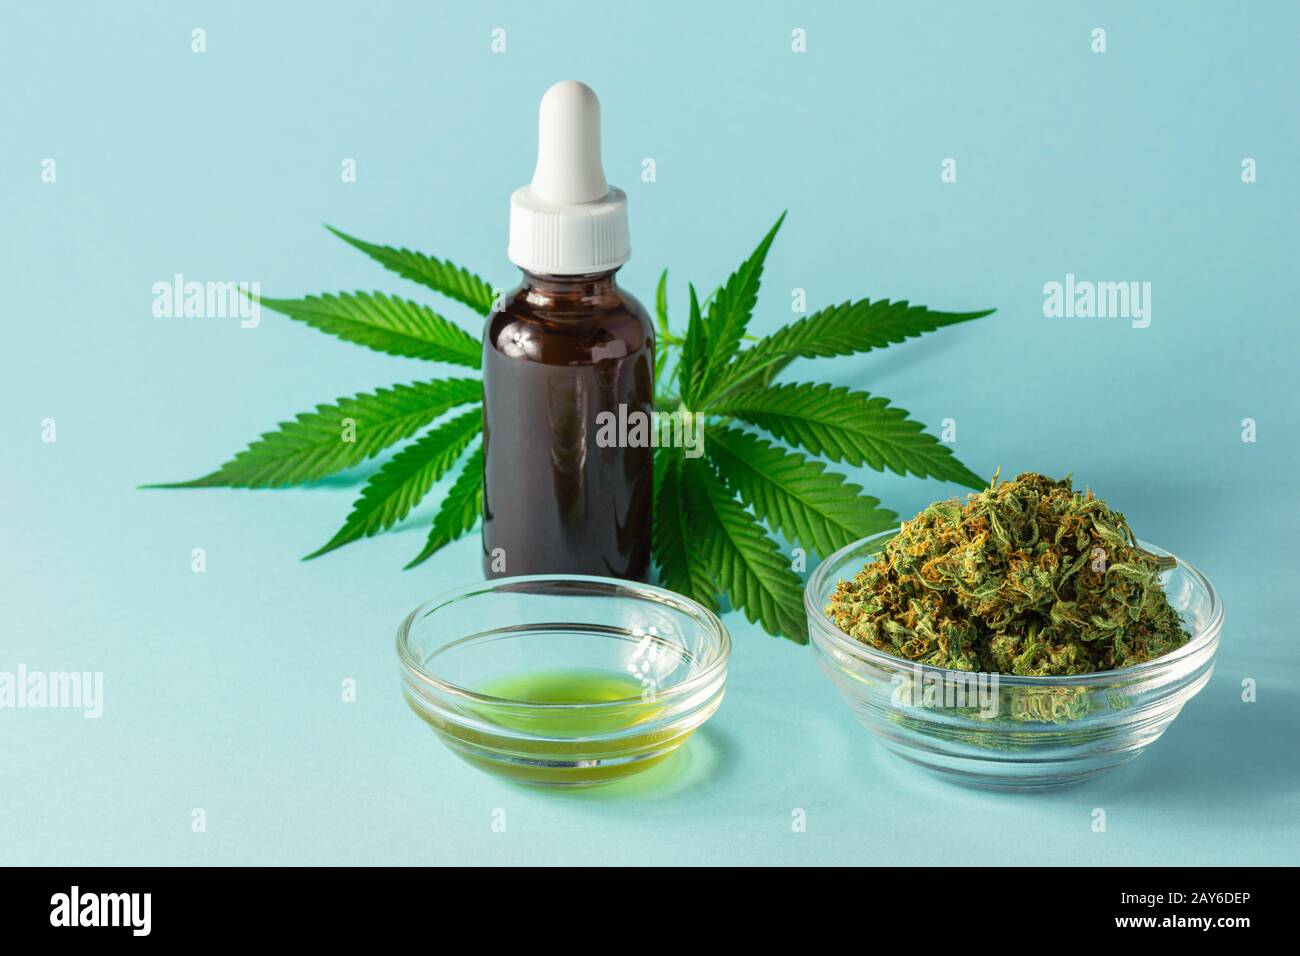 Glass Bottle of CBD or THC Oil with Hemp or Cannabis Buds, Oil, and Pot Leaves on Aqua Blue Background Stock Photo